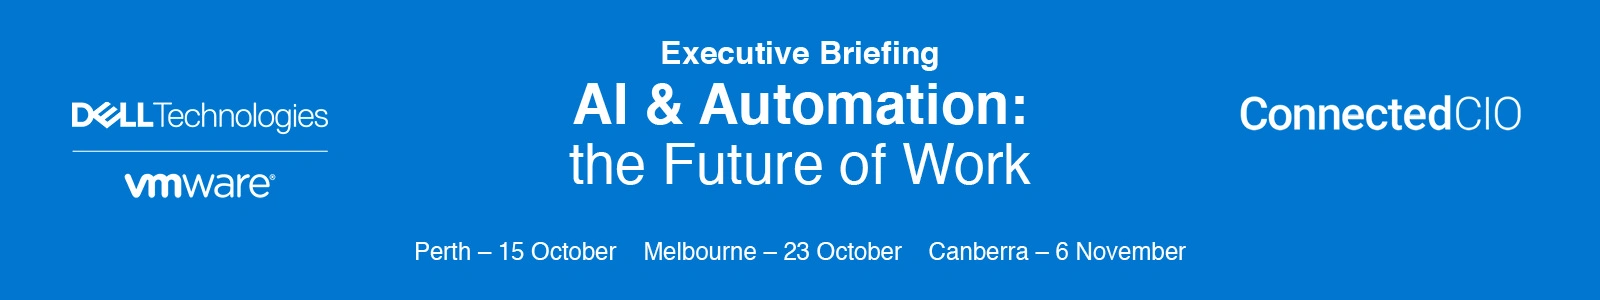 Executive Briefing the Future of Work